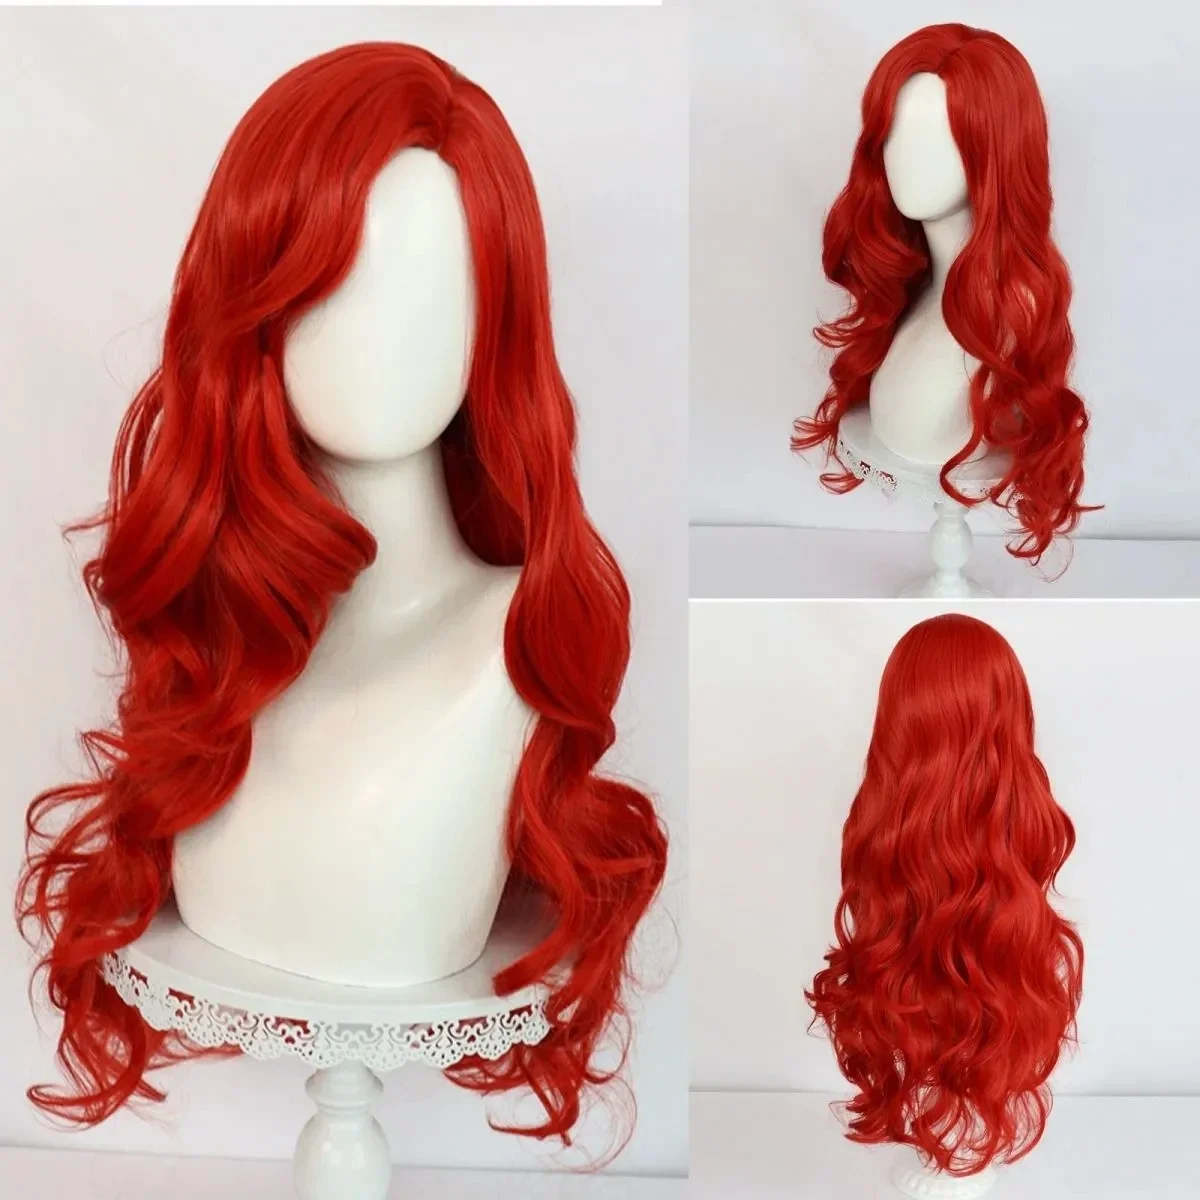 

Body Lucky Red Long Curly Girl Ruby Gillman Cosply Wig 26“Inch Wig Anime Halloween Wigs